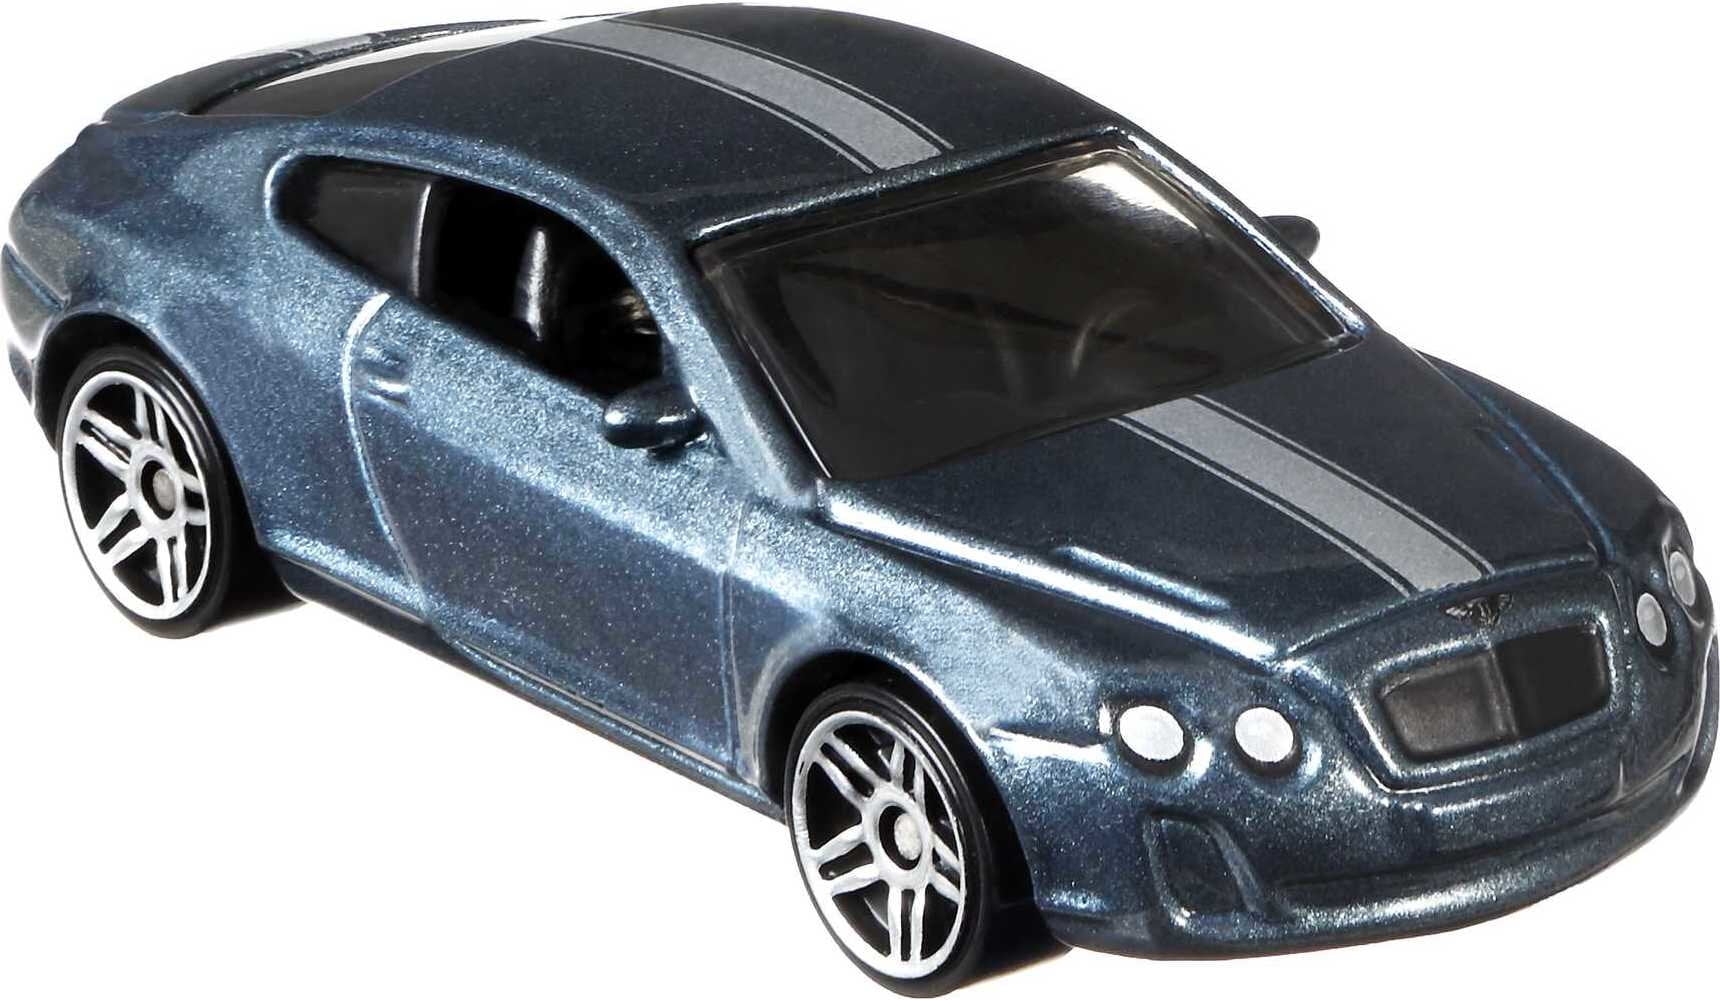 Hot Wheels Themed Die-Cast Toy Car or Truck in 1:64 Scale, Collectible Vehicle (Styles May Vary)